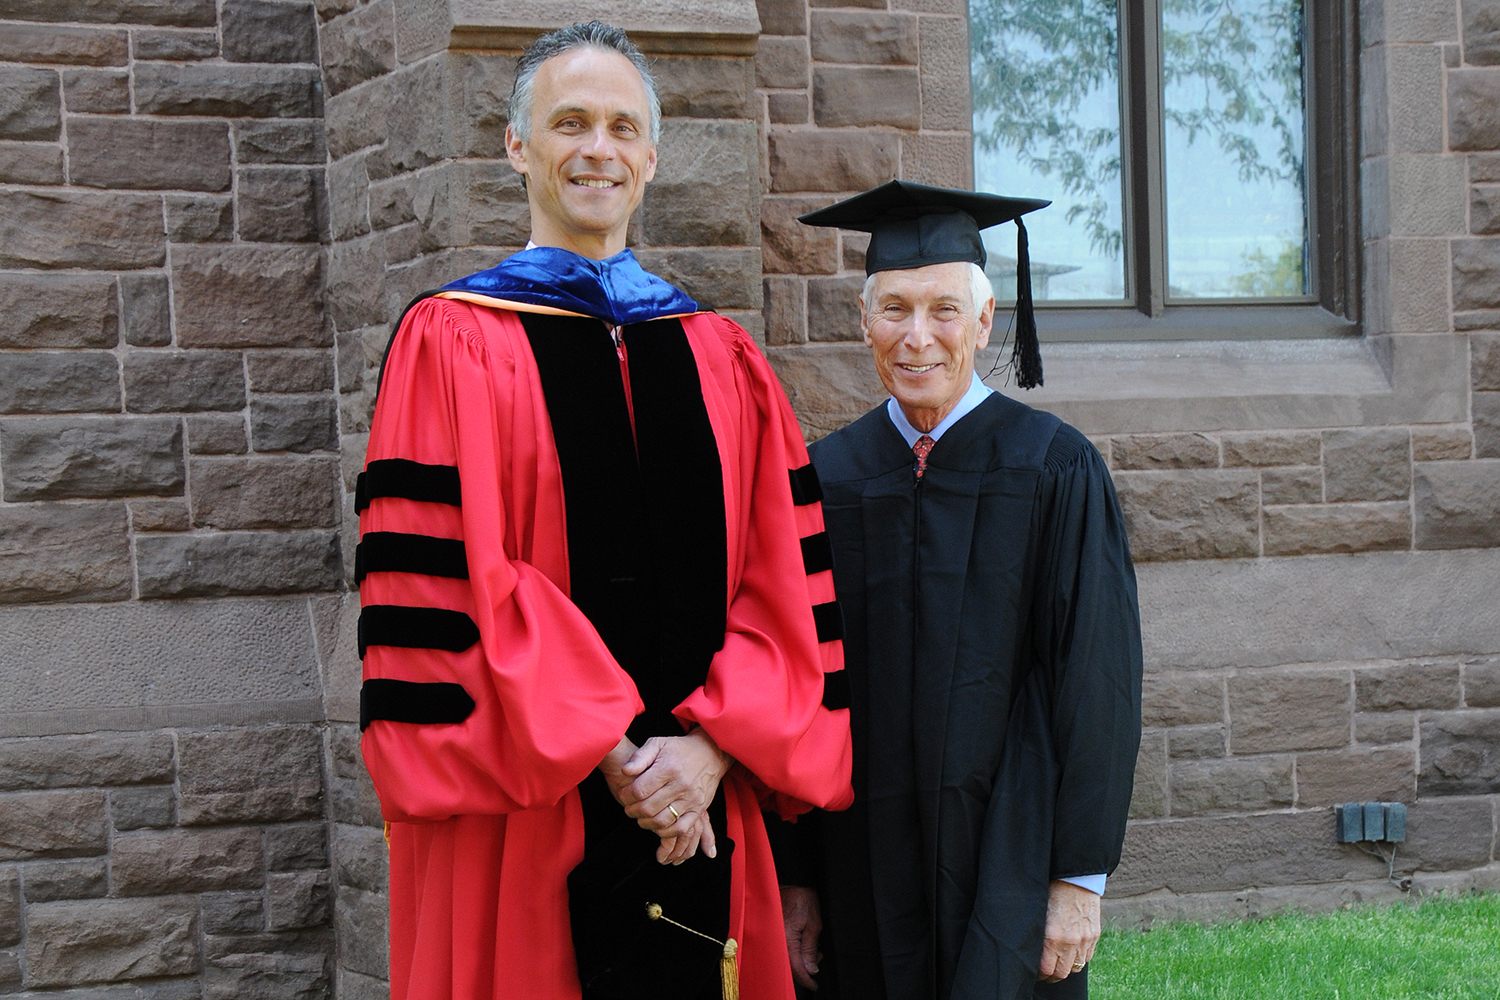 Michael Price received an Honorary Doctorate of Humane Letters this year on May 24. (Photo by John Van Vlack)